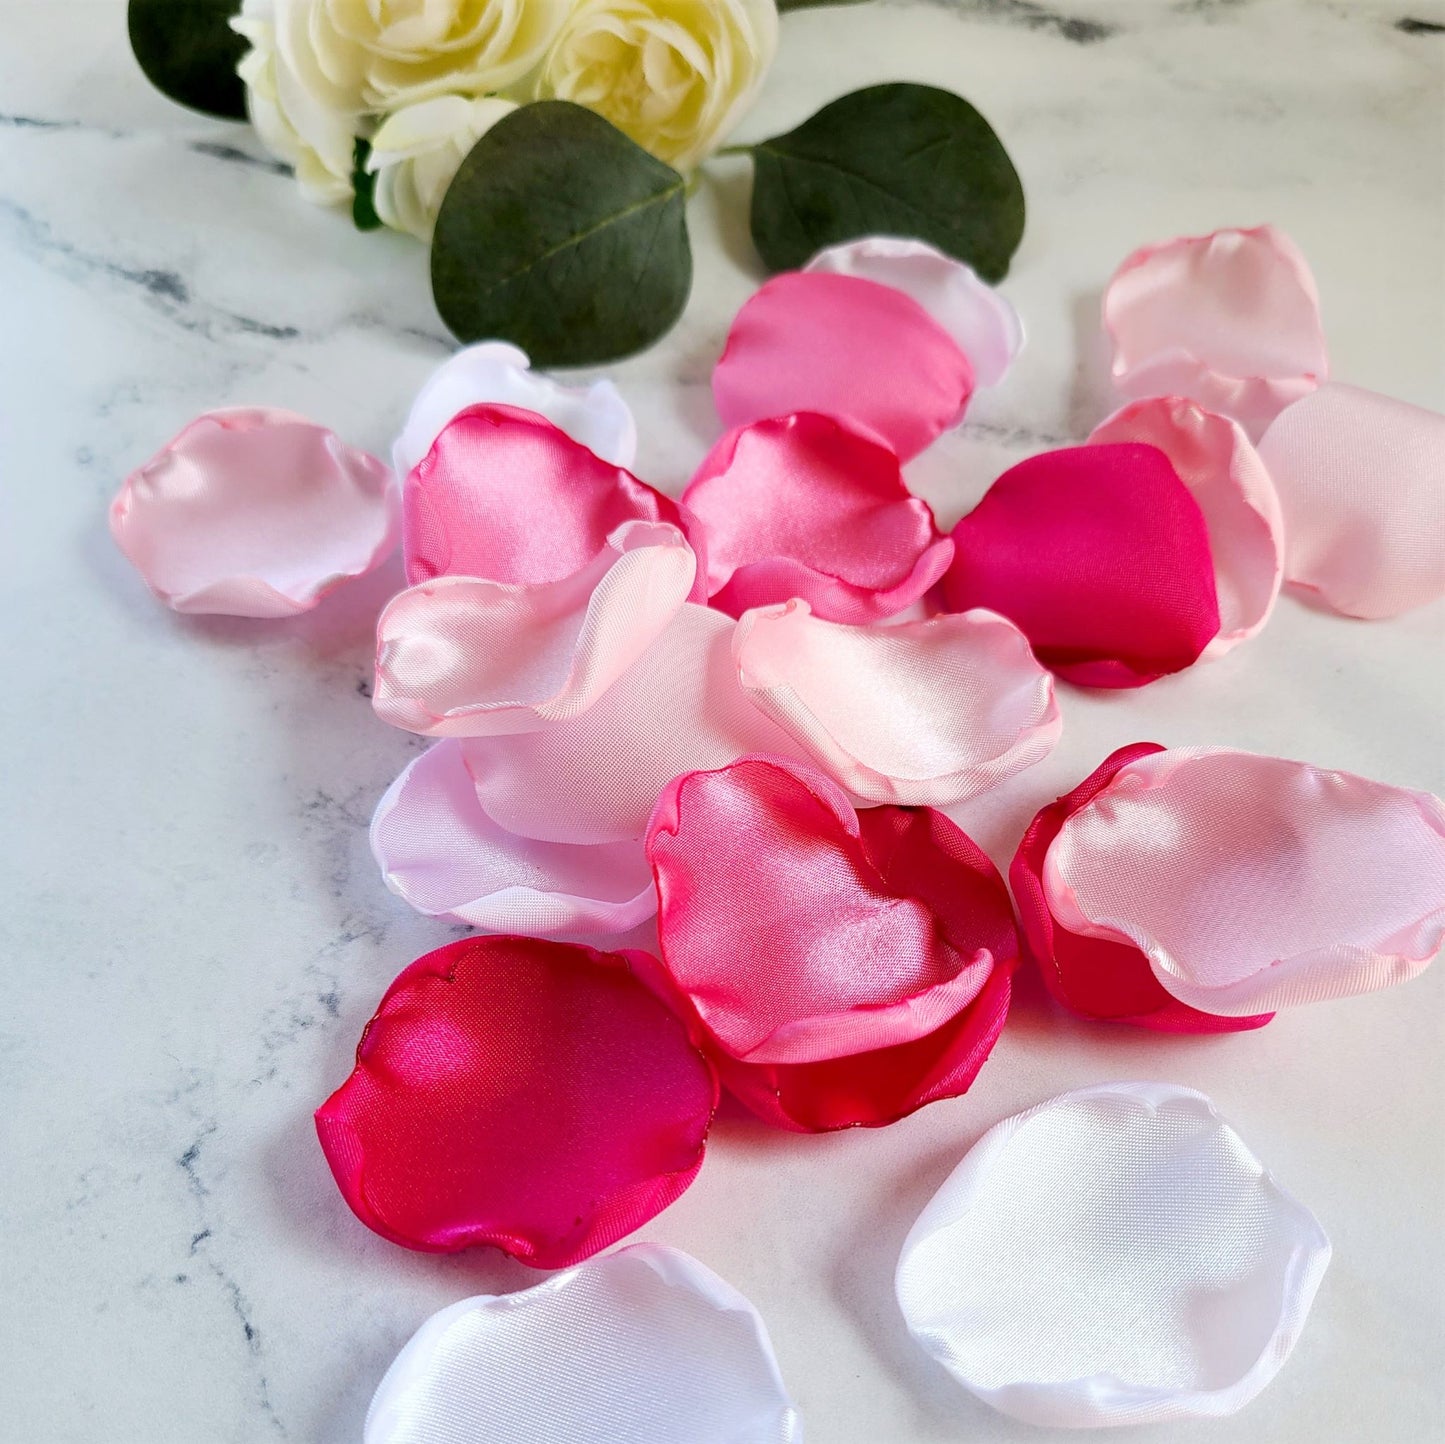 Hot Pink, Pink , white, rose petals for wedding aisle decor. Barbiecore